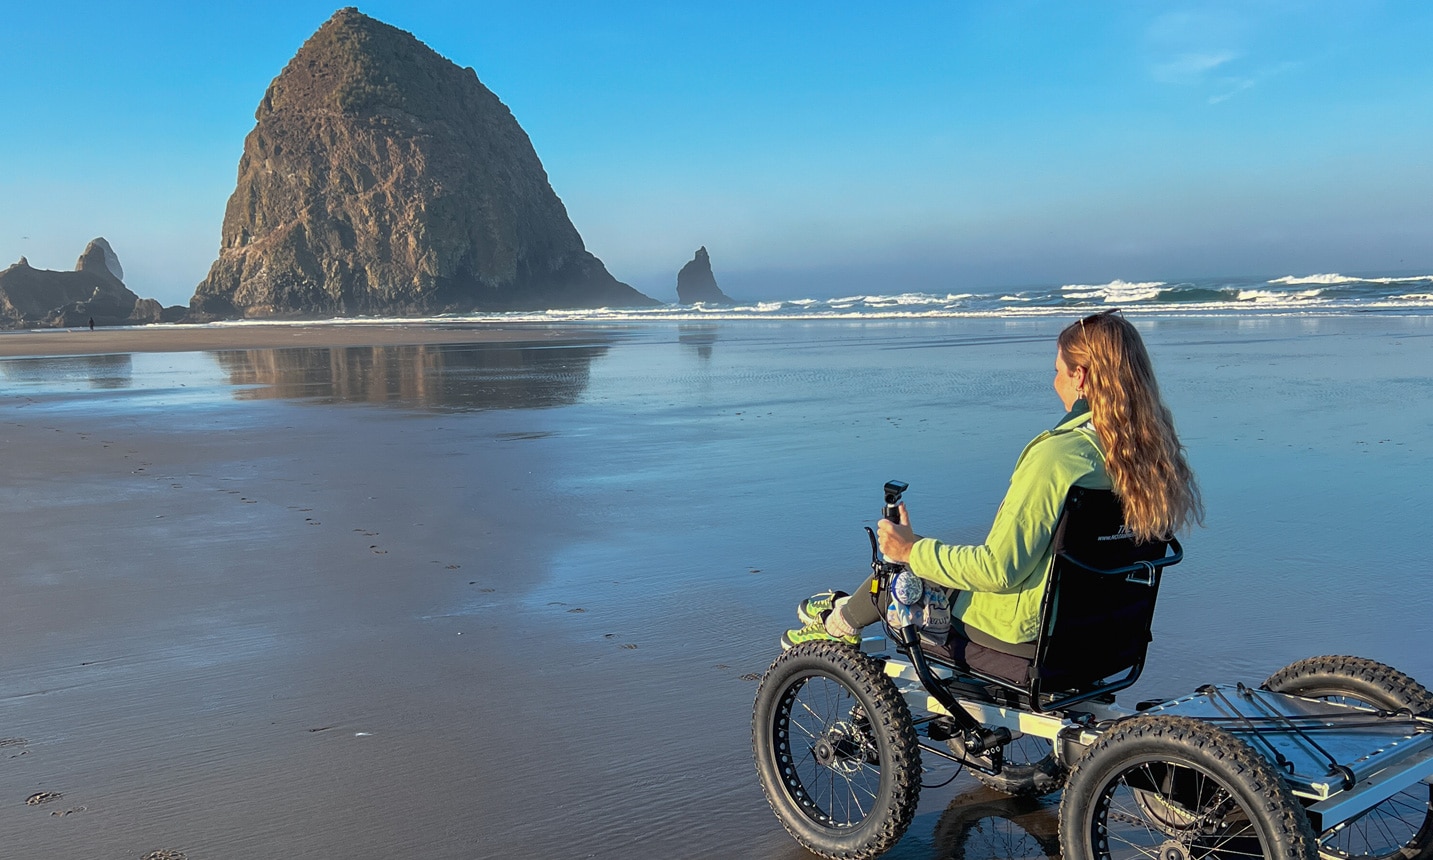 A woman in a power wheelchair on a beach. In the background a large haystack rock towers over the shore.